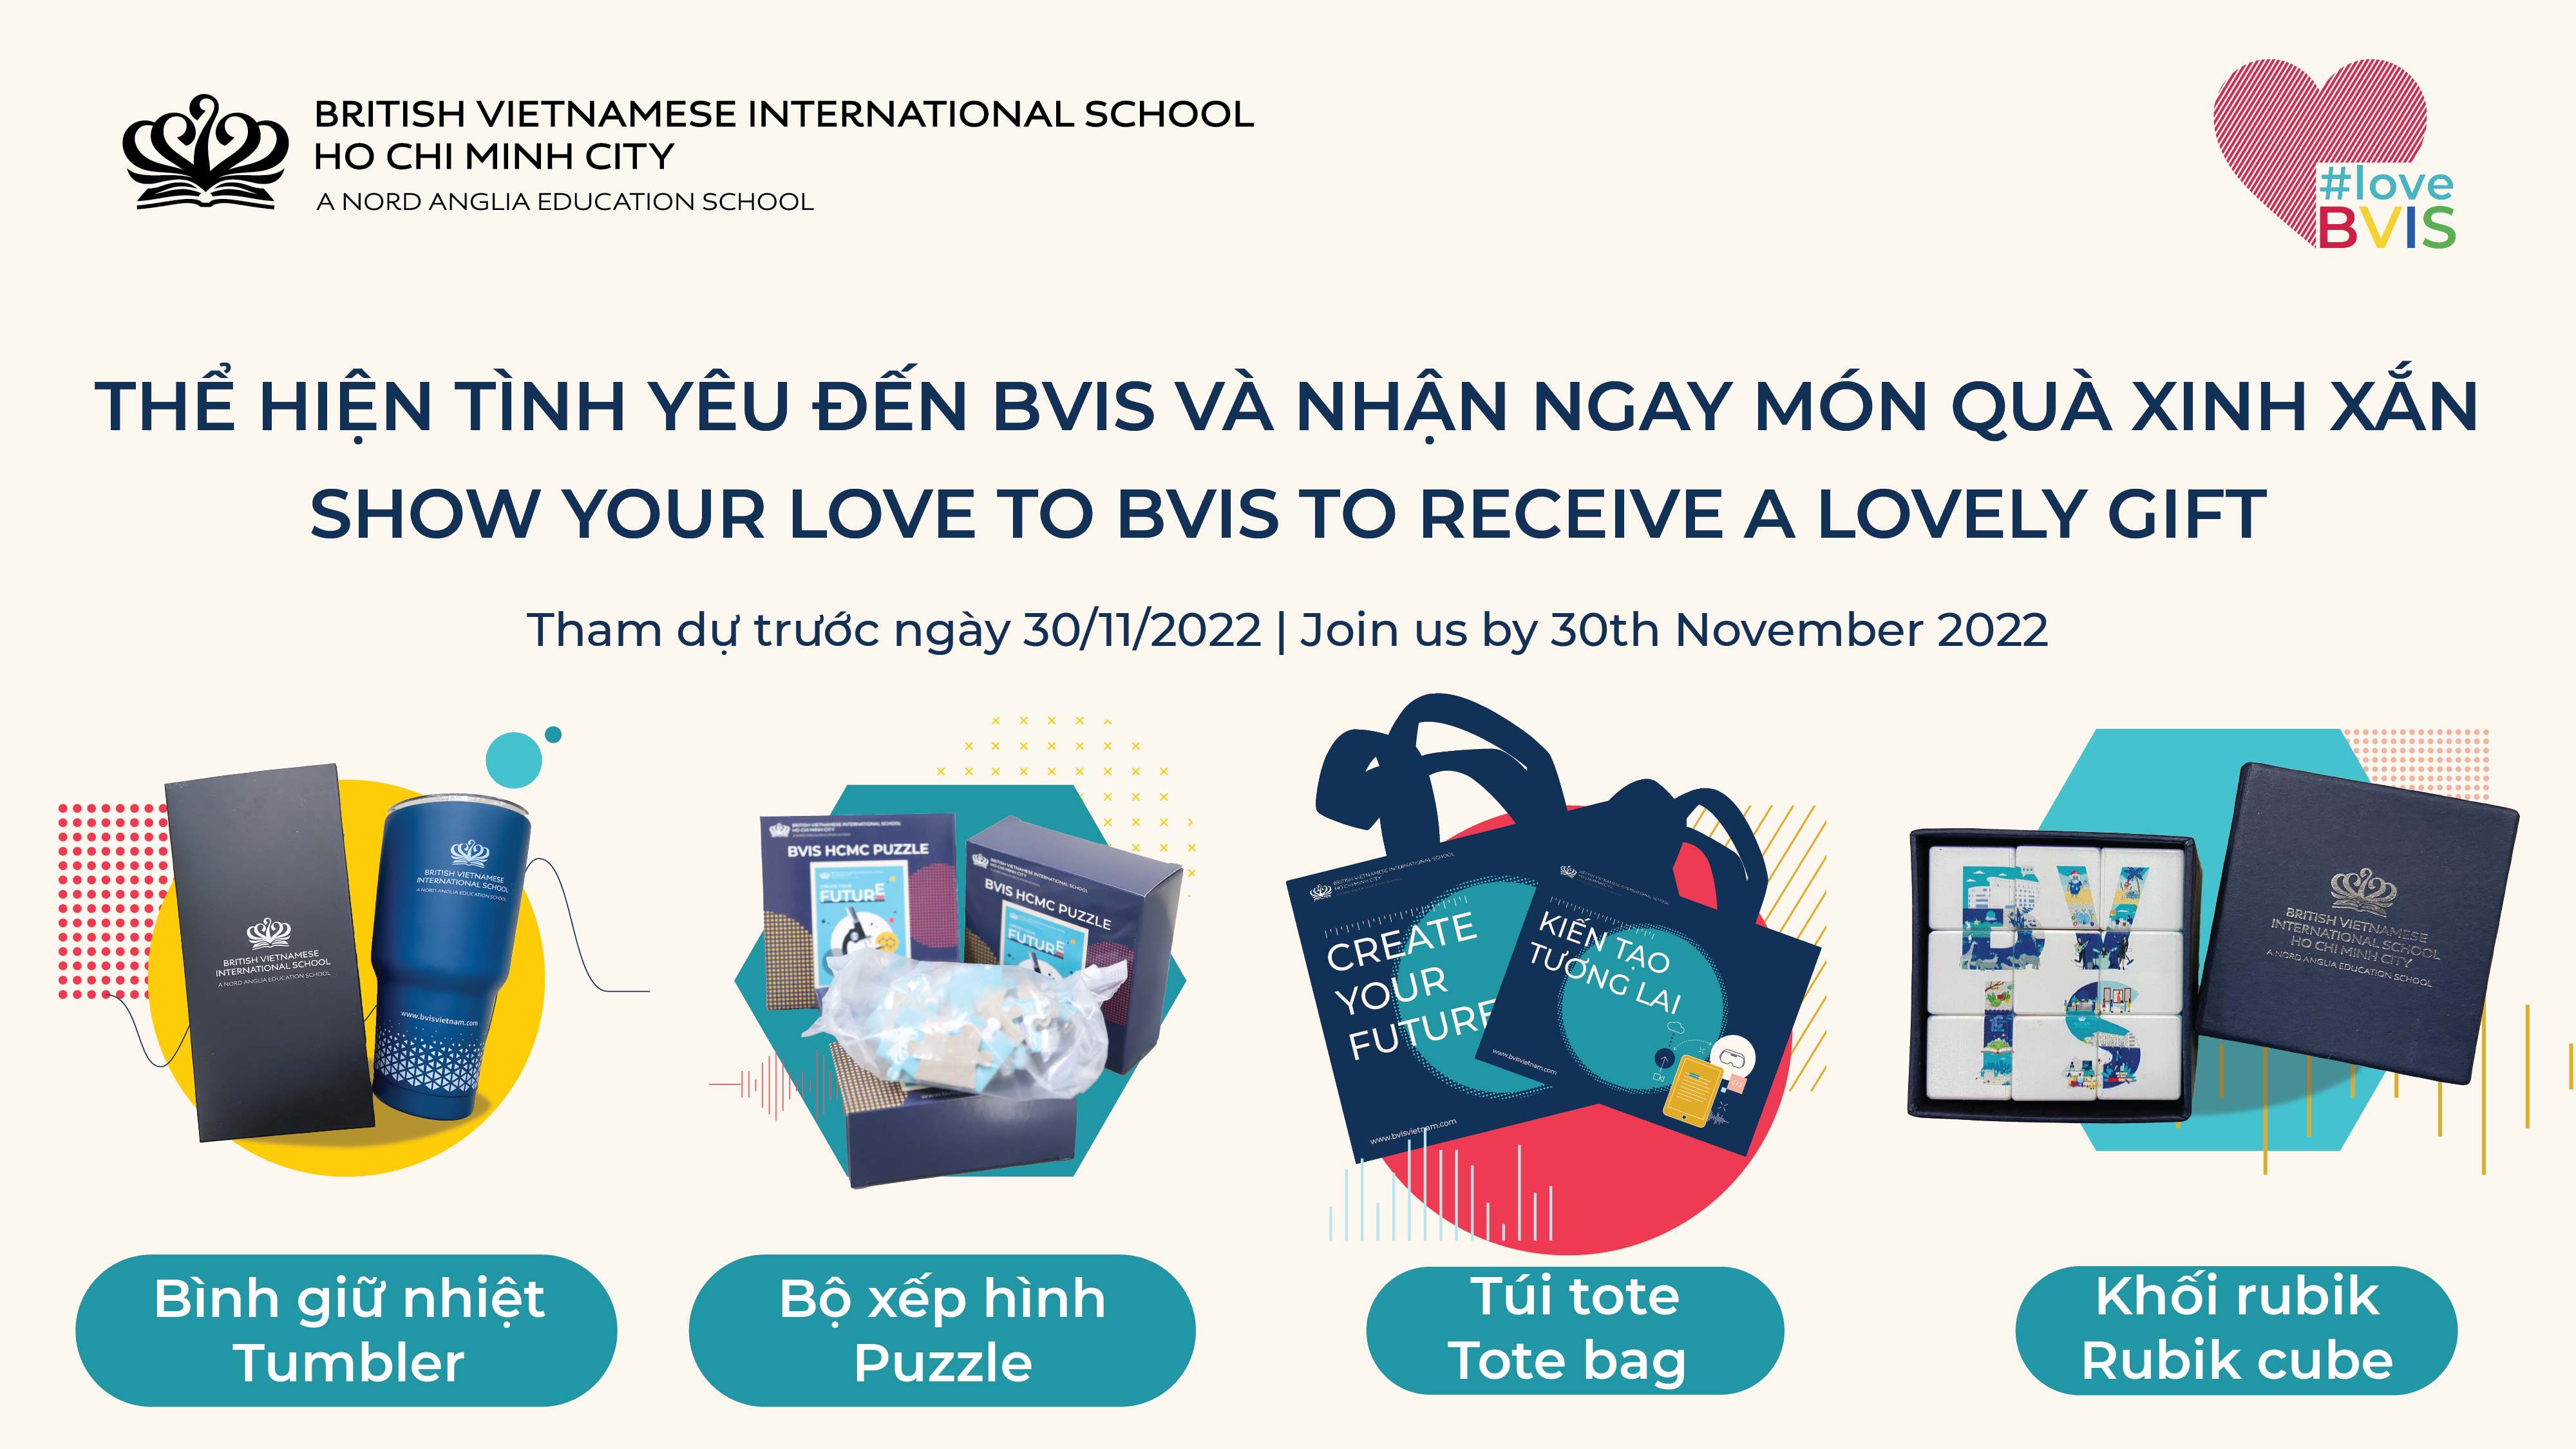 #LOVEBVIS2022 - SHOW YOUR LOVE TO BVIS TODAY!  - LOVEBVIS2022 SHOW YOUR LOVE TO BVIS TODAY